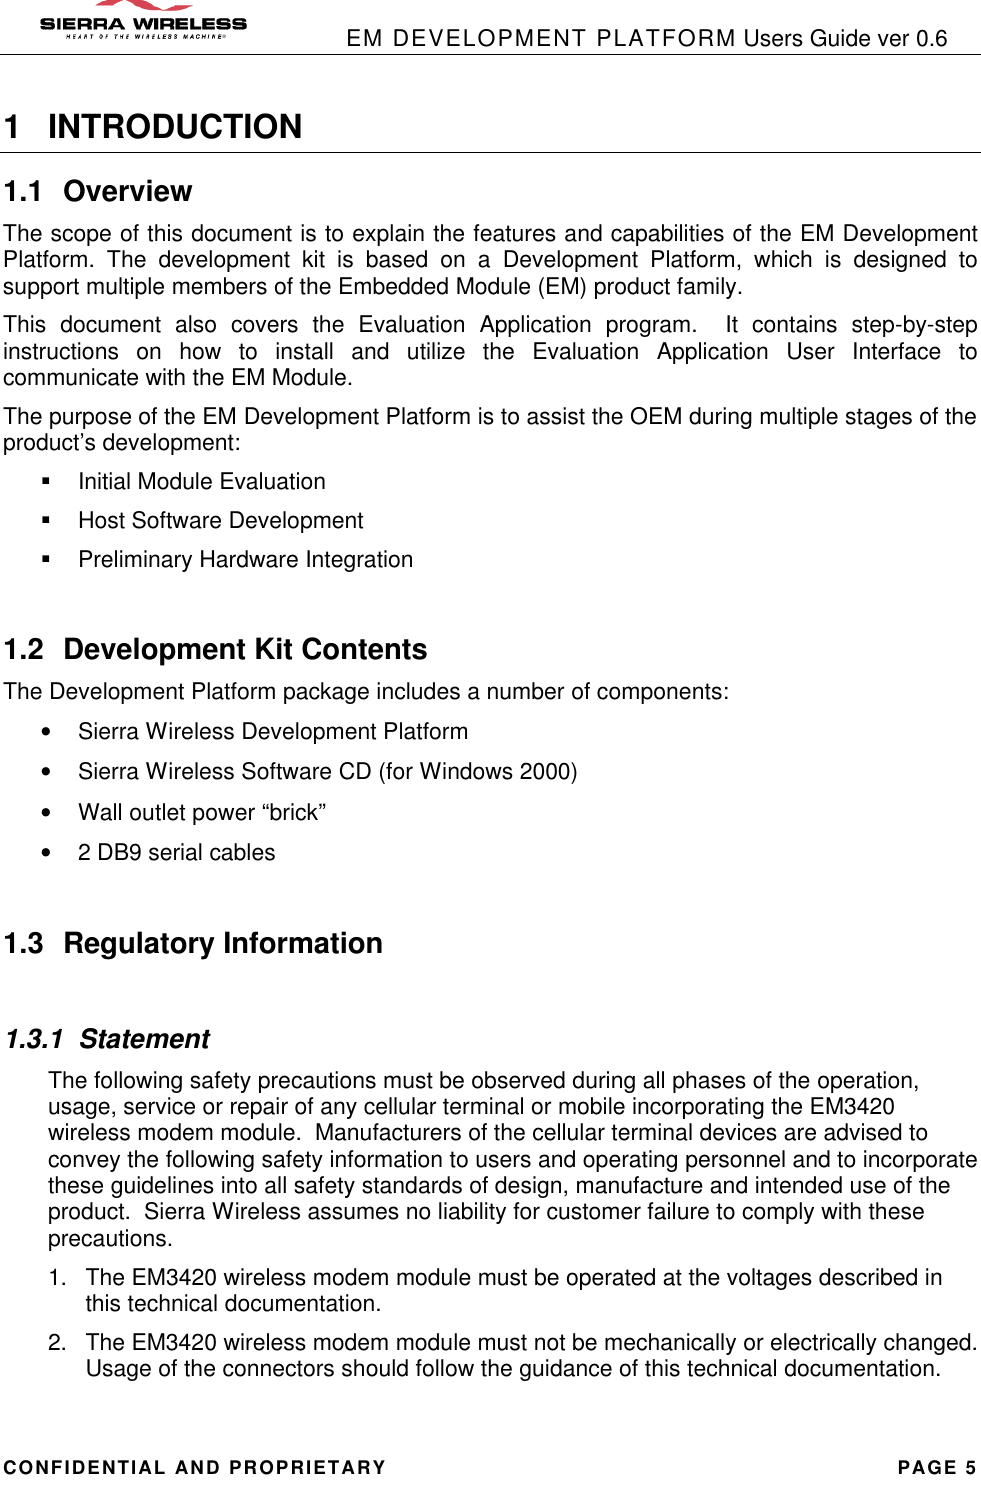            EM DEVELOPMENT PLATFORM Users Guide ver 0.6 CONFIDENTIAL AND PROPRIETARY PAGE 5 1 INTRODUCTION 1.1 Overview The scope of this document is to explain the features and capabilities of the EM Development Platform. The development kit is based on a Development Platform, which is designed to support multiple members of the Embedded Module (EM) product family.   This document also covers the Evaluation Application program.  It contains step-by-step instructions on how to install and utilize the Evaluation Application User Interface to communicate with the EM Module. The purpose of the EM Development Platform is to assist the OEM during multiple stages of the product’s development: § Initial Module Evaluation § Host Software Development § Preliminary Hardware Integration  1.2 Development Kit Contents The Development Platform package includes a number of components: • Sierra Wireless Development Platform • Sierra Wireless Software CD (for Windows 2000) • Wall outlet power “brick” • 2 DB9 serial cables  1.3 Regulatory Information  1.3.1 Statement The following safety precautions must be observed during all phases of the operation, usage, service or repair of any cellular terminal or mobile incorporating the EM3420 wireless modem module.  Manufacturers of the cellular terminal devices are advised to convey the following safety information to users and operating personnel and to incorporate these guidelines into all safety standards of design, manufacture and intended use of the product.  Sierra Wireless assumes no liability for customer failure to comply with these precautions. 1. The EM3420 wireless modem module must be operated at the voltages described in this technical documentation. 2. The EM3420 wireless modem module must not be mechanically or electrically changed.  Usage of the connectors should follow the guidance of this technical documentation. 